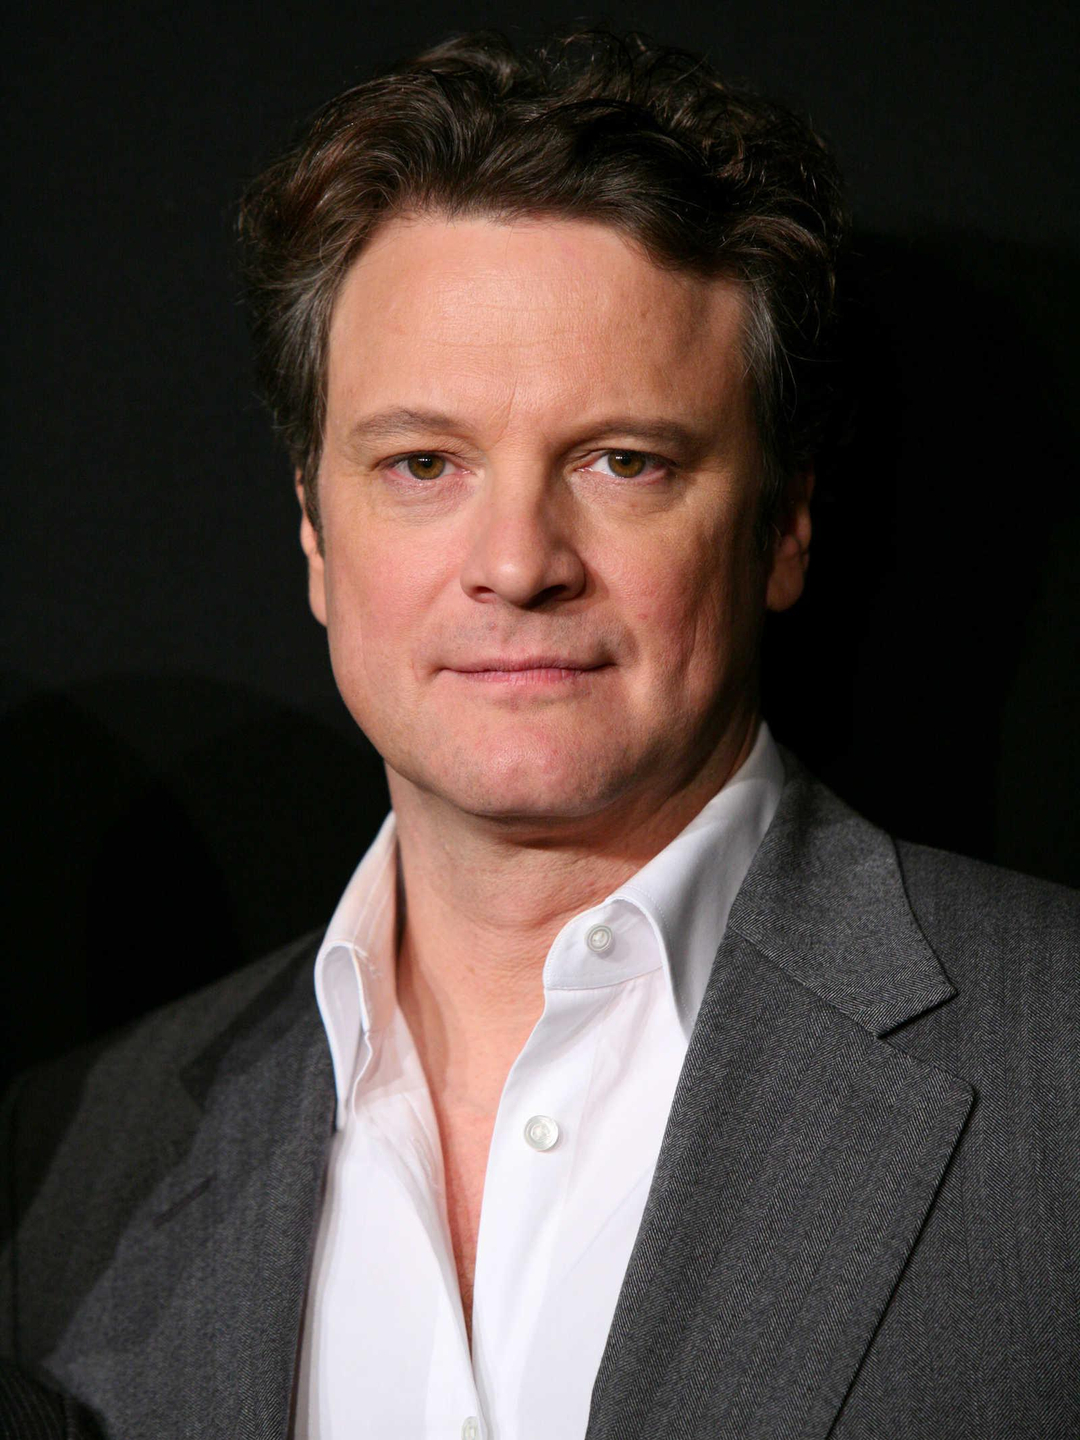 Colin Firth relationship